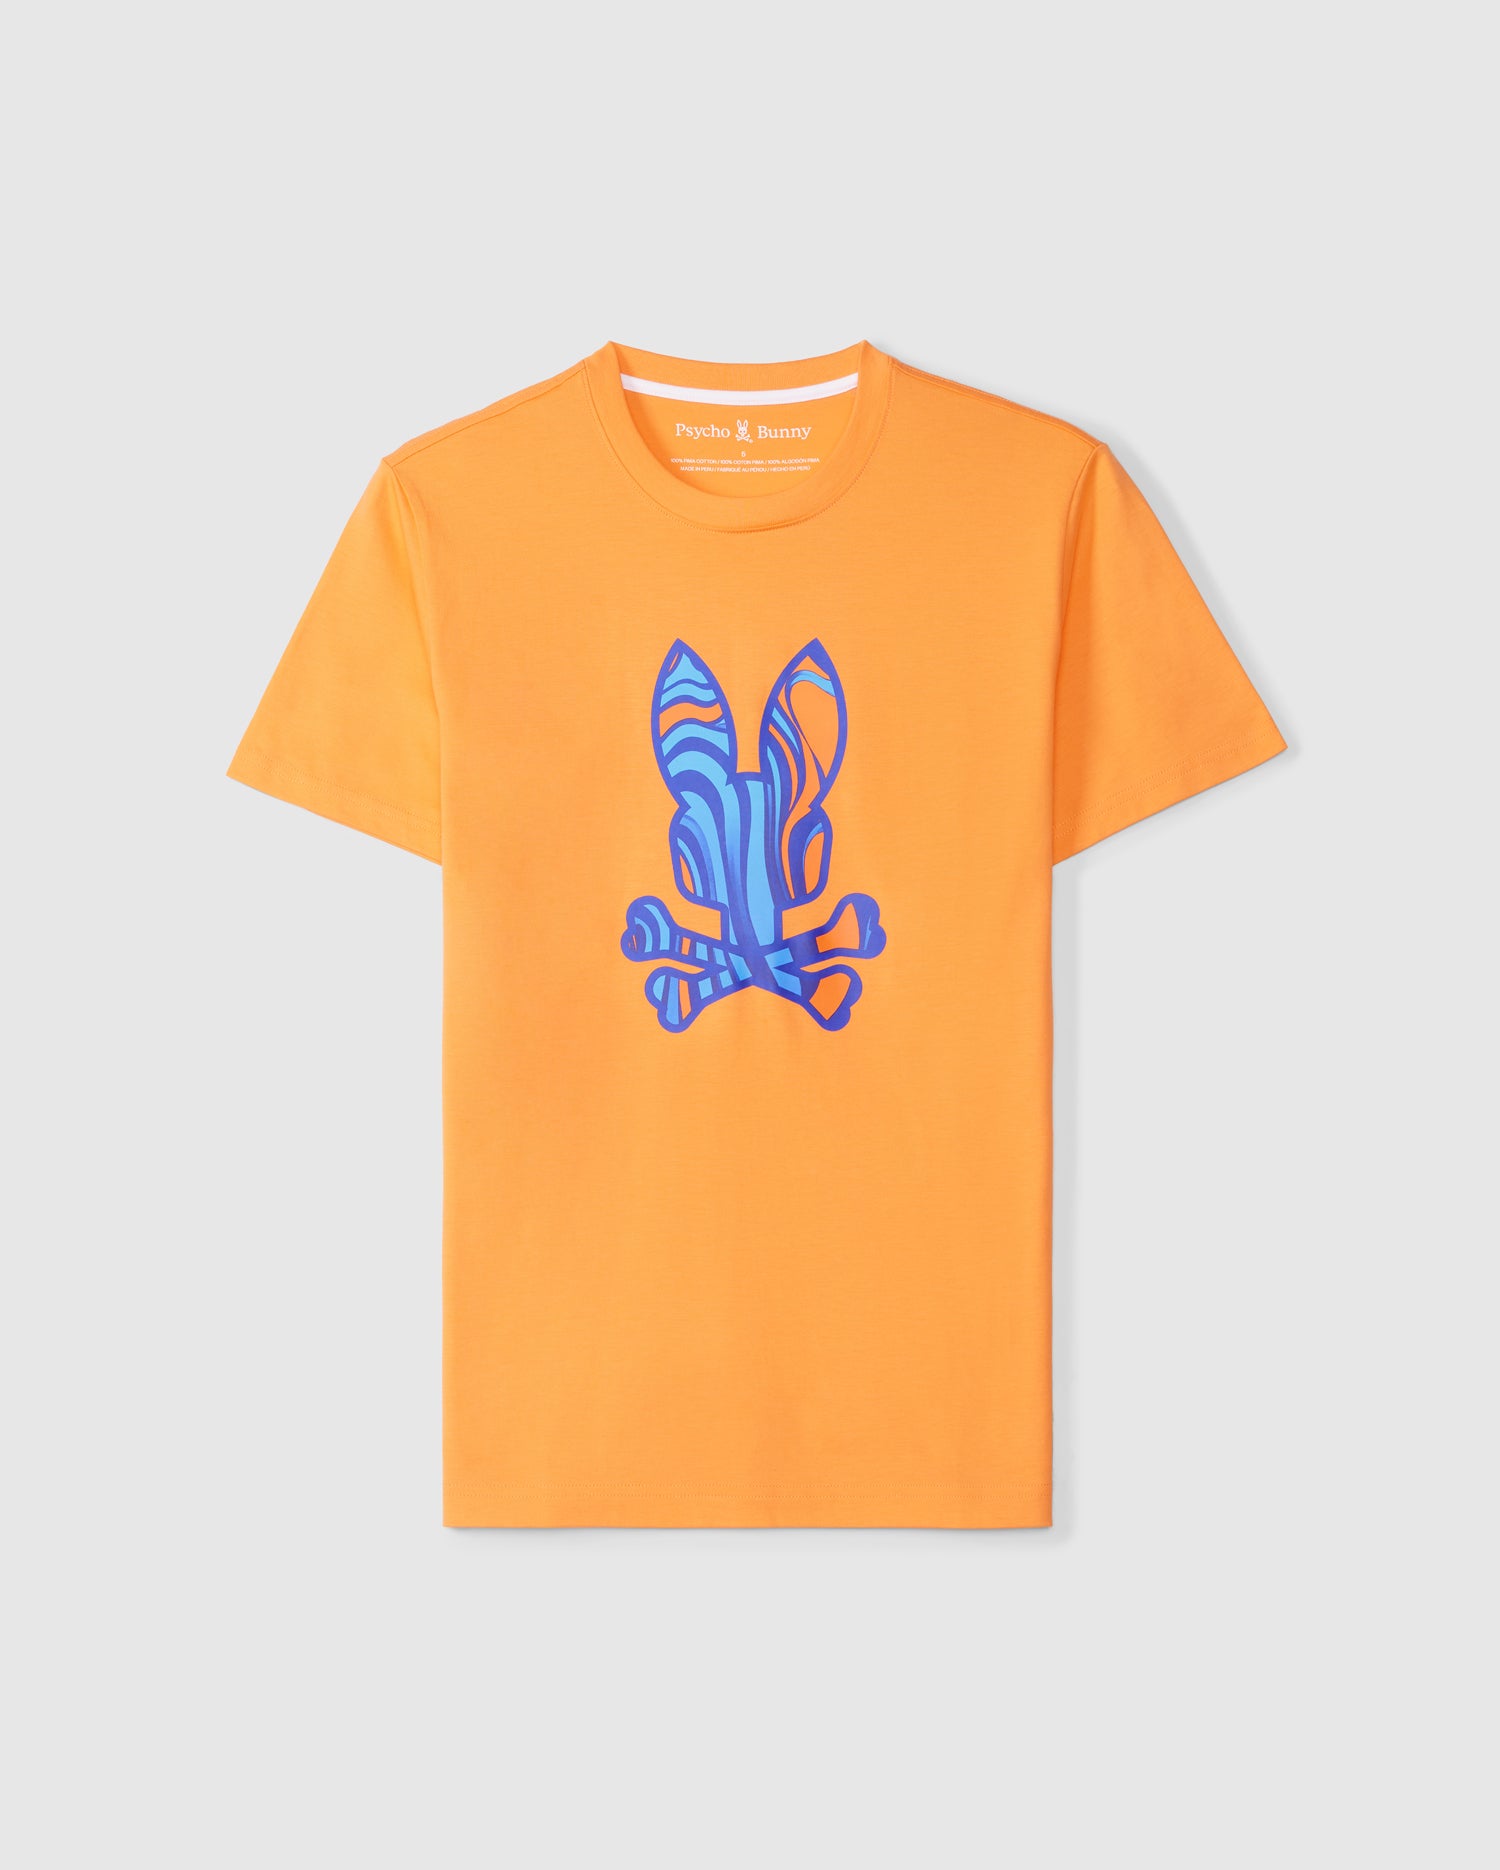 An orange MENS NEVADA GRAPHIC TEE - B6U515C200 featuring a colorful, abstract design in blue, purple, and pink tones centered on the chest. Made from soft Pima cotton, this t-shirt has a classic crew neck and short sleeves by Psycho Bunny.